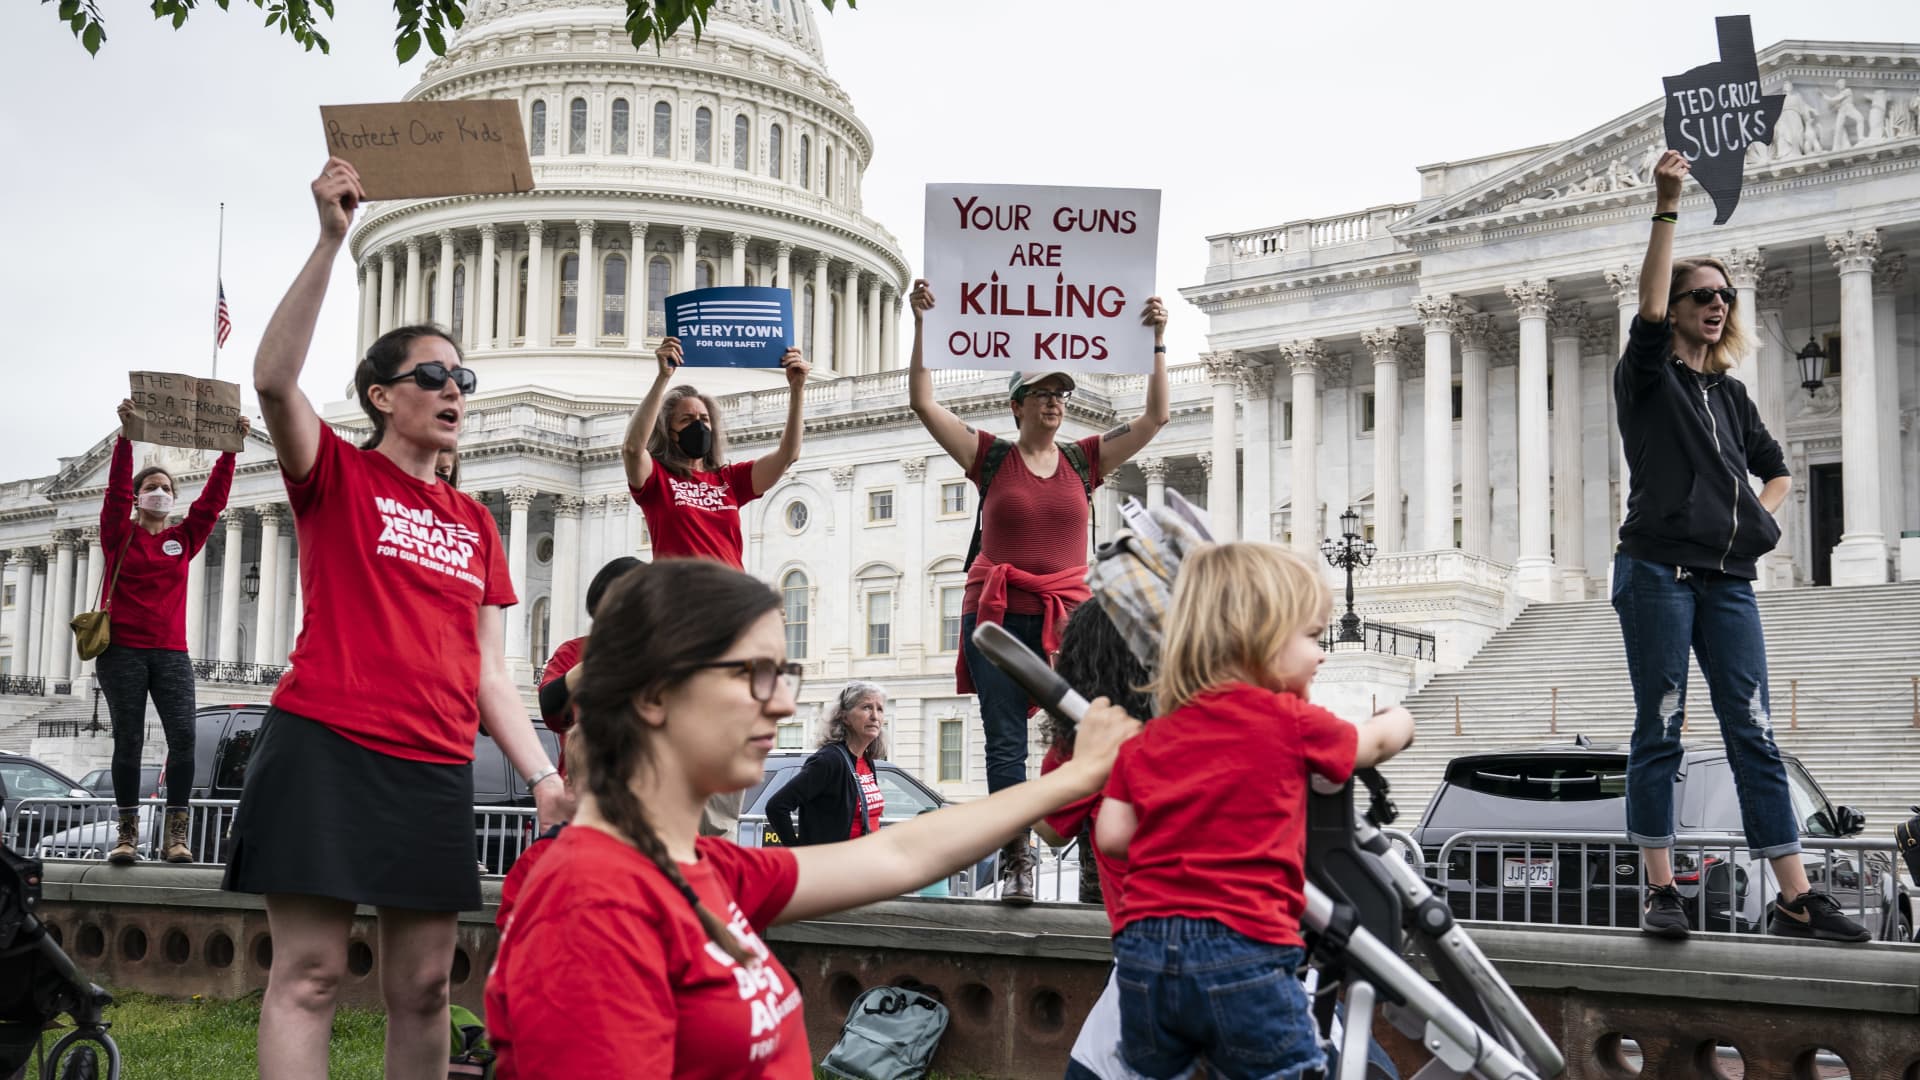 Activists listen as Senate Democrats speak during a news conference demanding action on gun control legislation after a gunman killed 19 children and two teachers in a Texas elementary school this week, on Capitol Hill on Thursday, May 26, 2022 in Washington, DC.